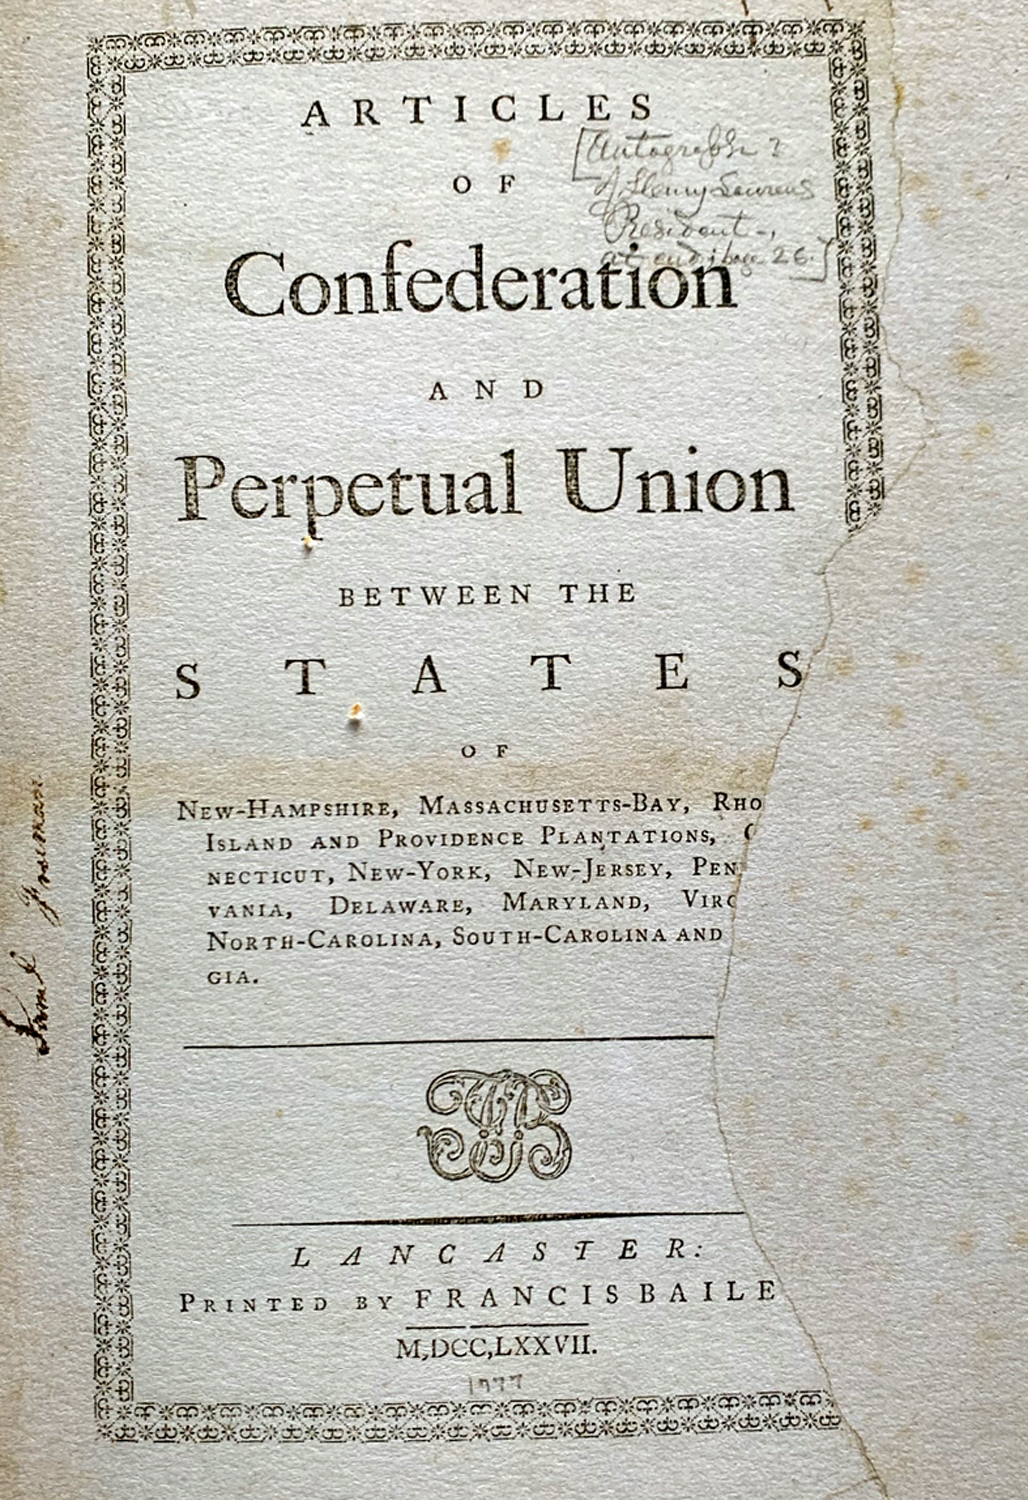 Primary and Secondary Sources - The Constitution of the United States:  First Public Printing